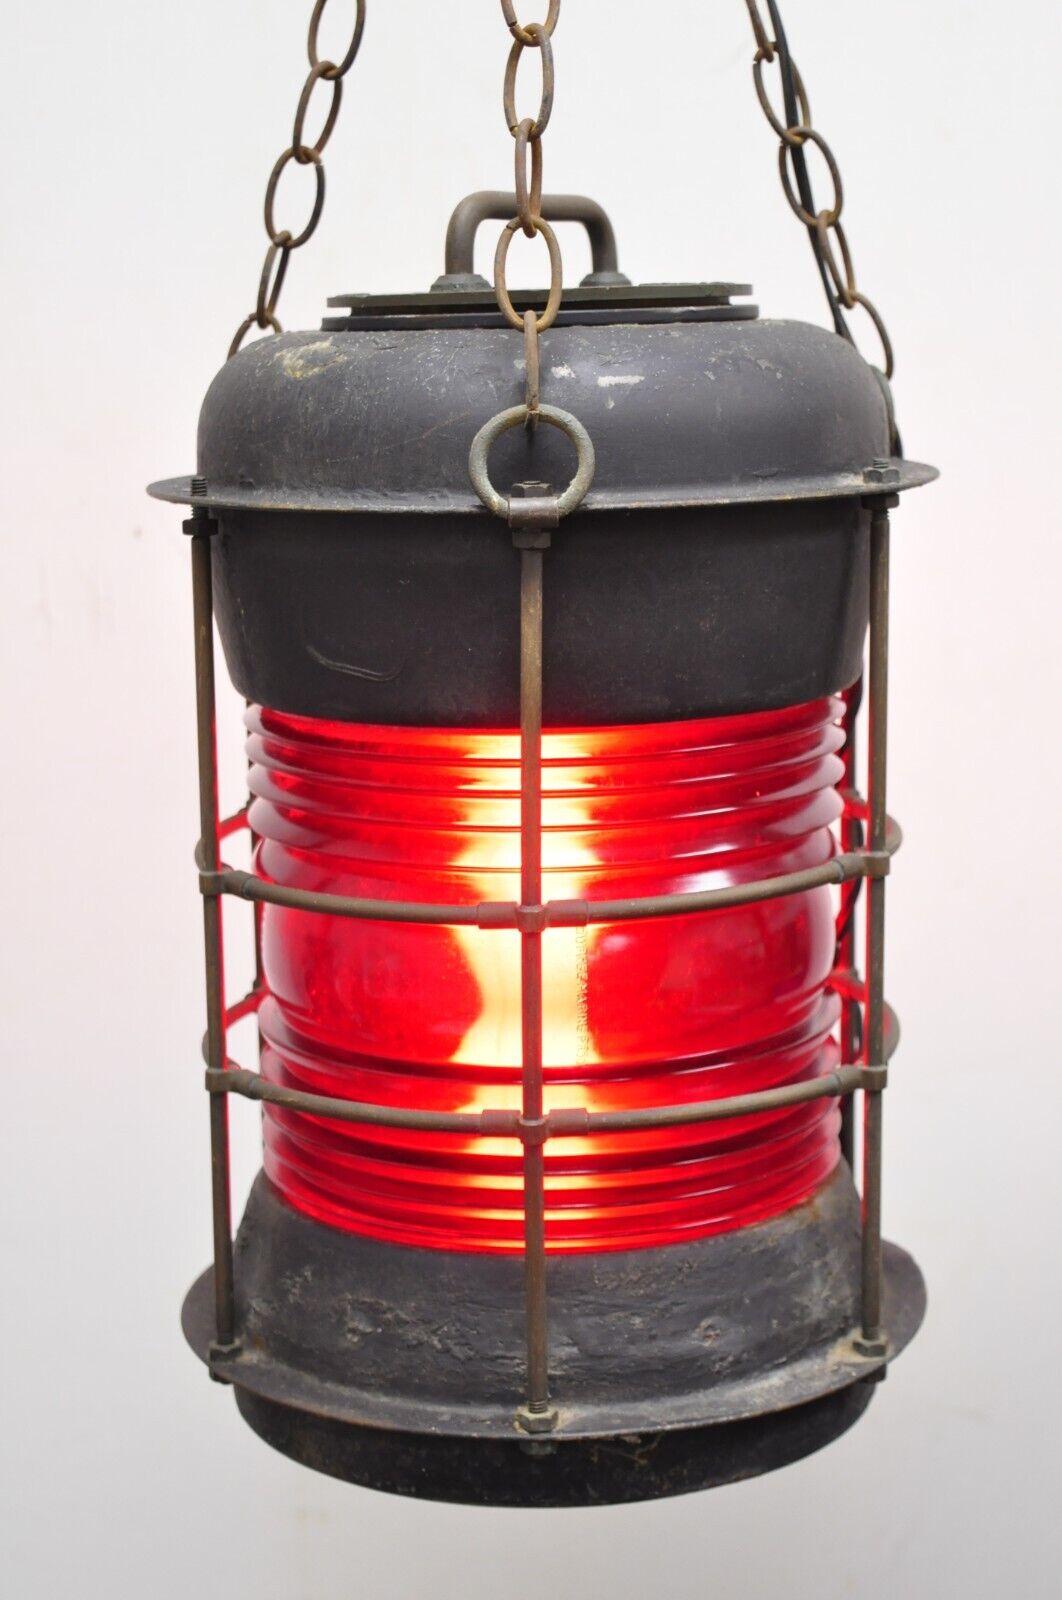 Antique Durkee Marine Ship Lantern Fixture Red Fresnel Pendant Chandlier (B). Item features 360 degree red glass fresnel lens, steel metal frame, original label, very nice antique item, quality American craftsmanship, converted into a functioning